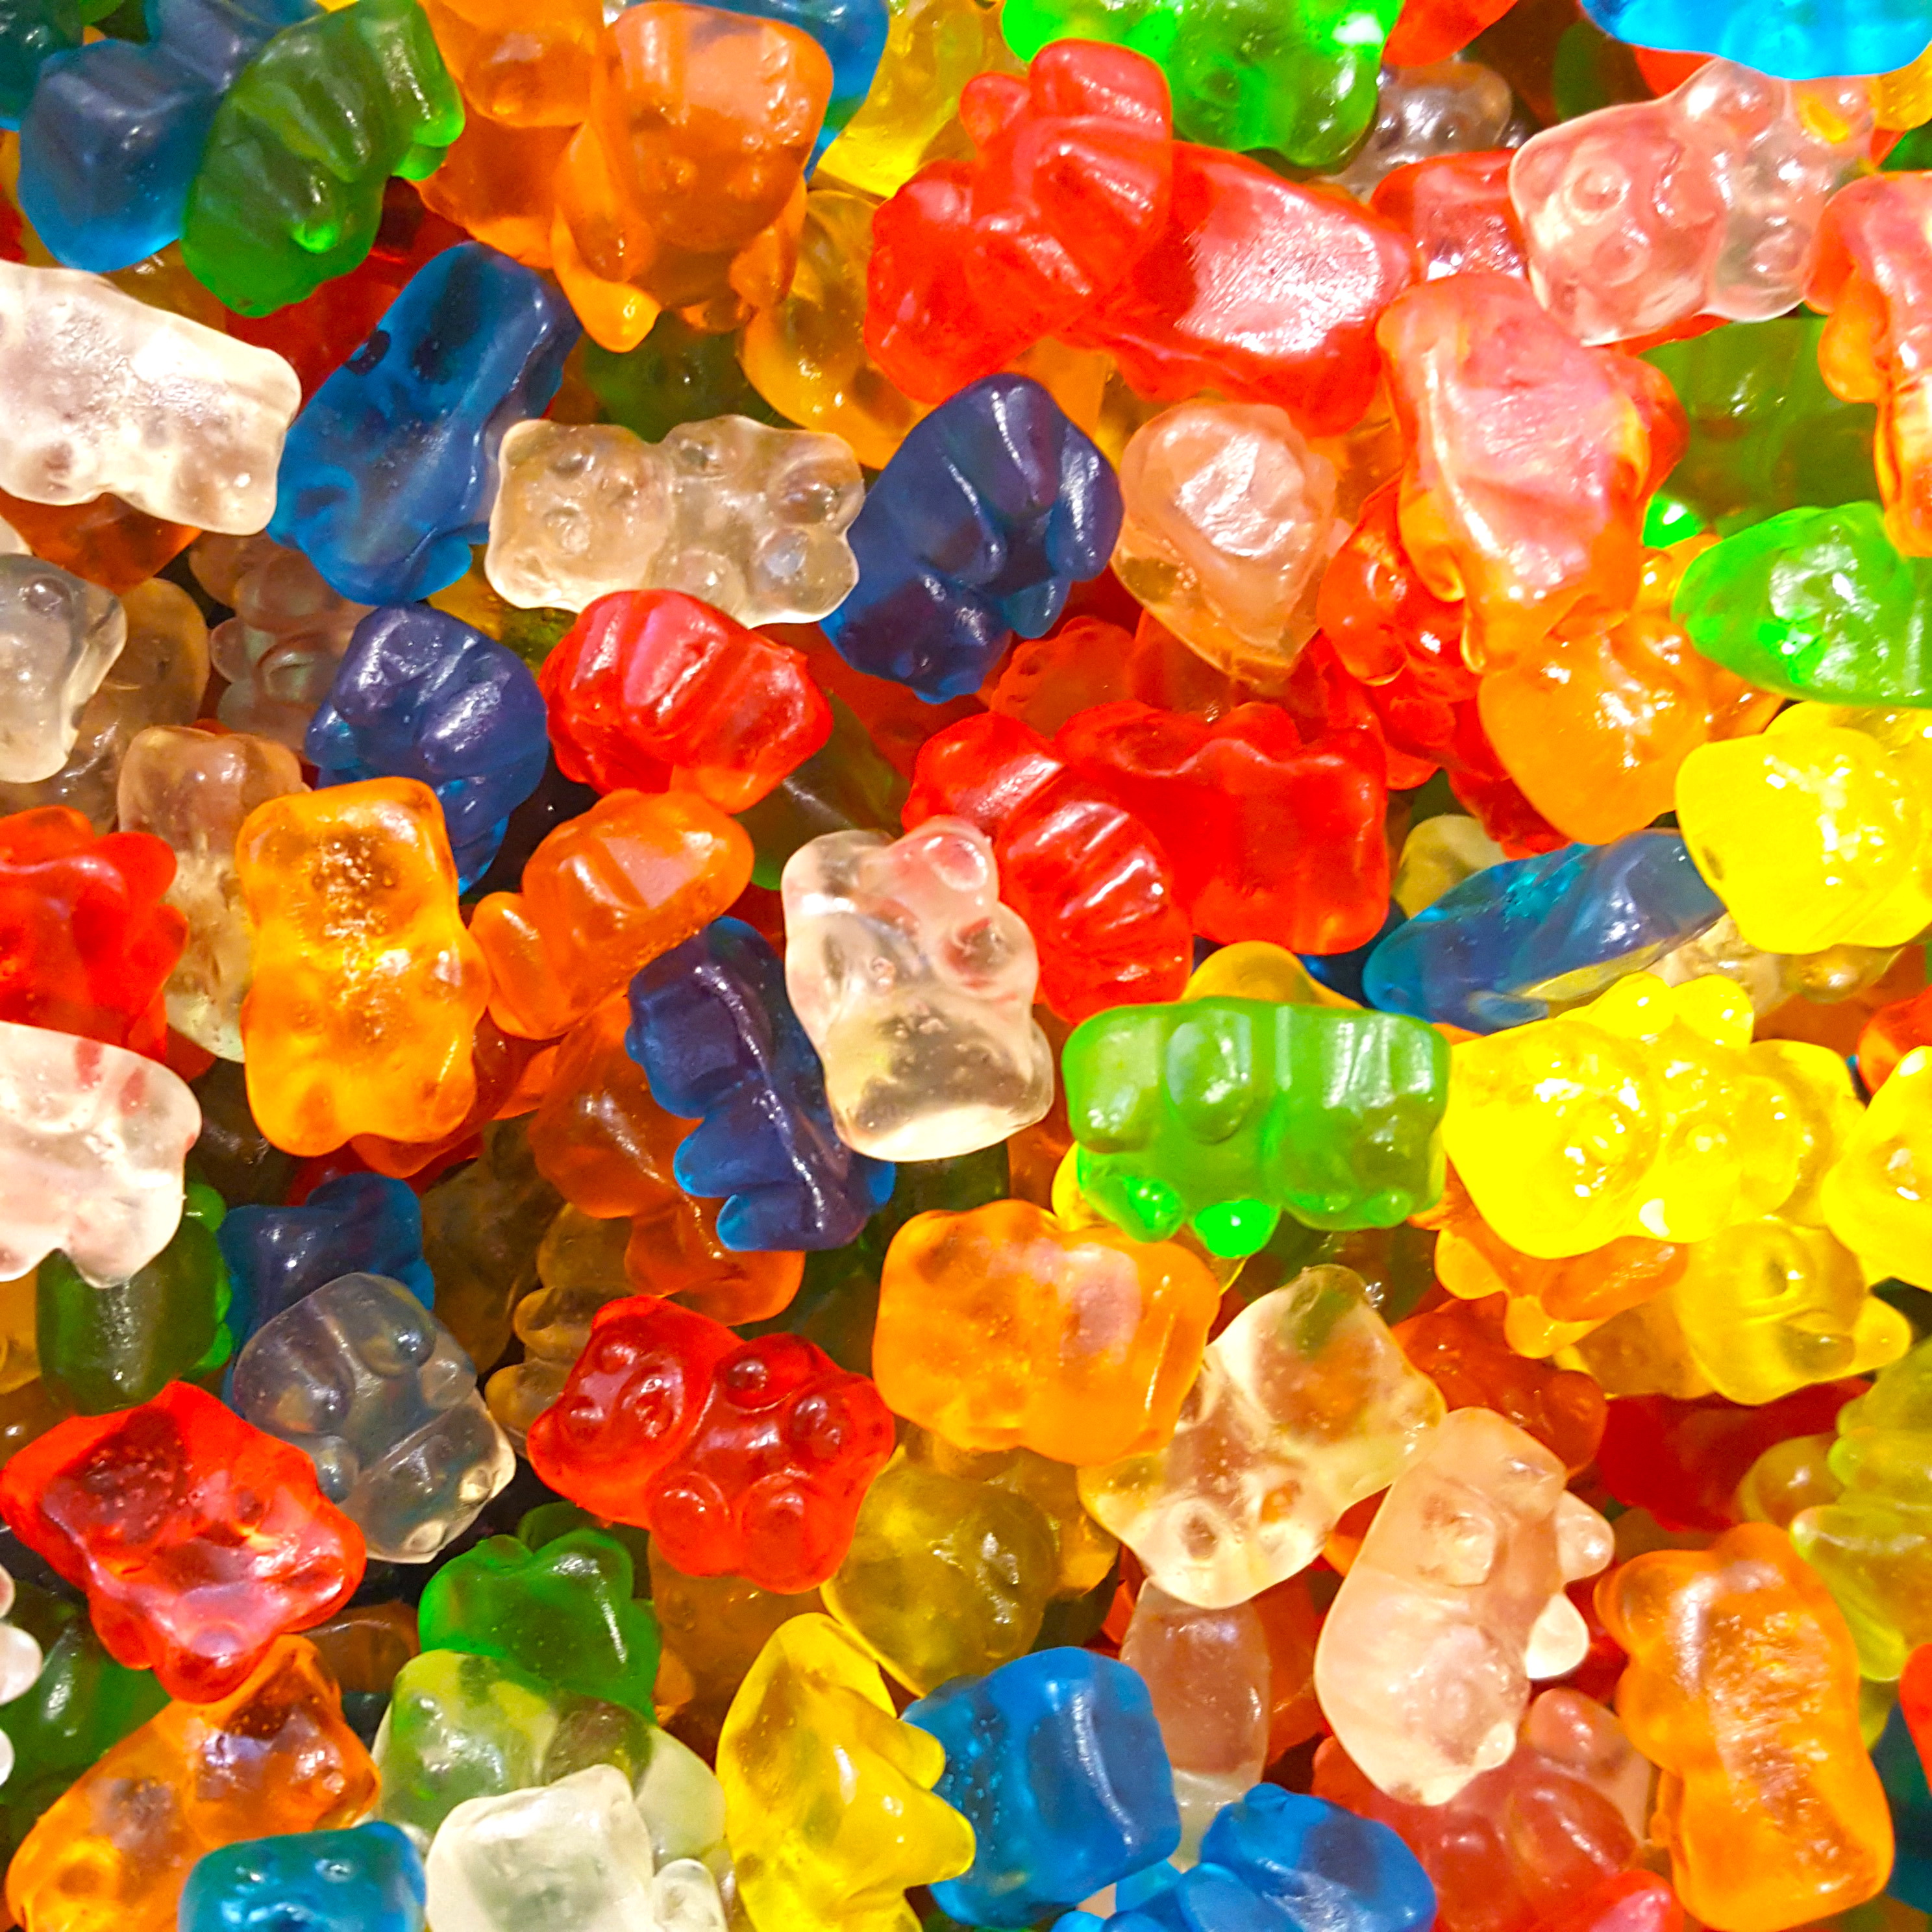 Top 91+ Pictures Pictures Of Gummy Bears Excellent